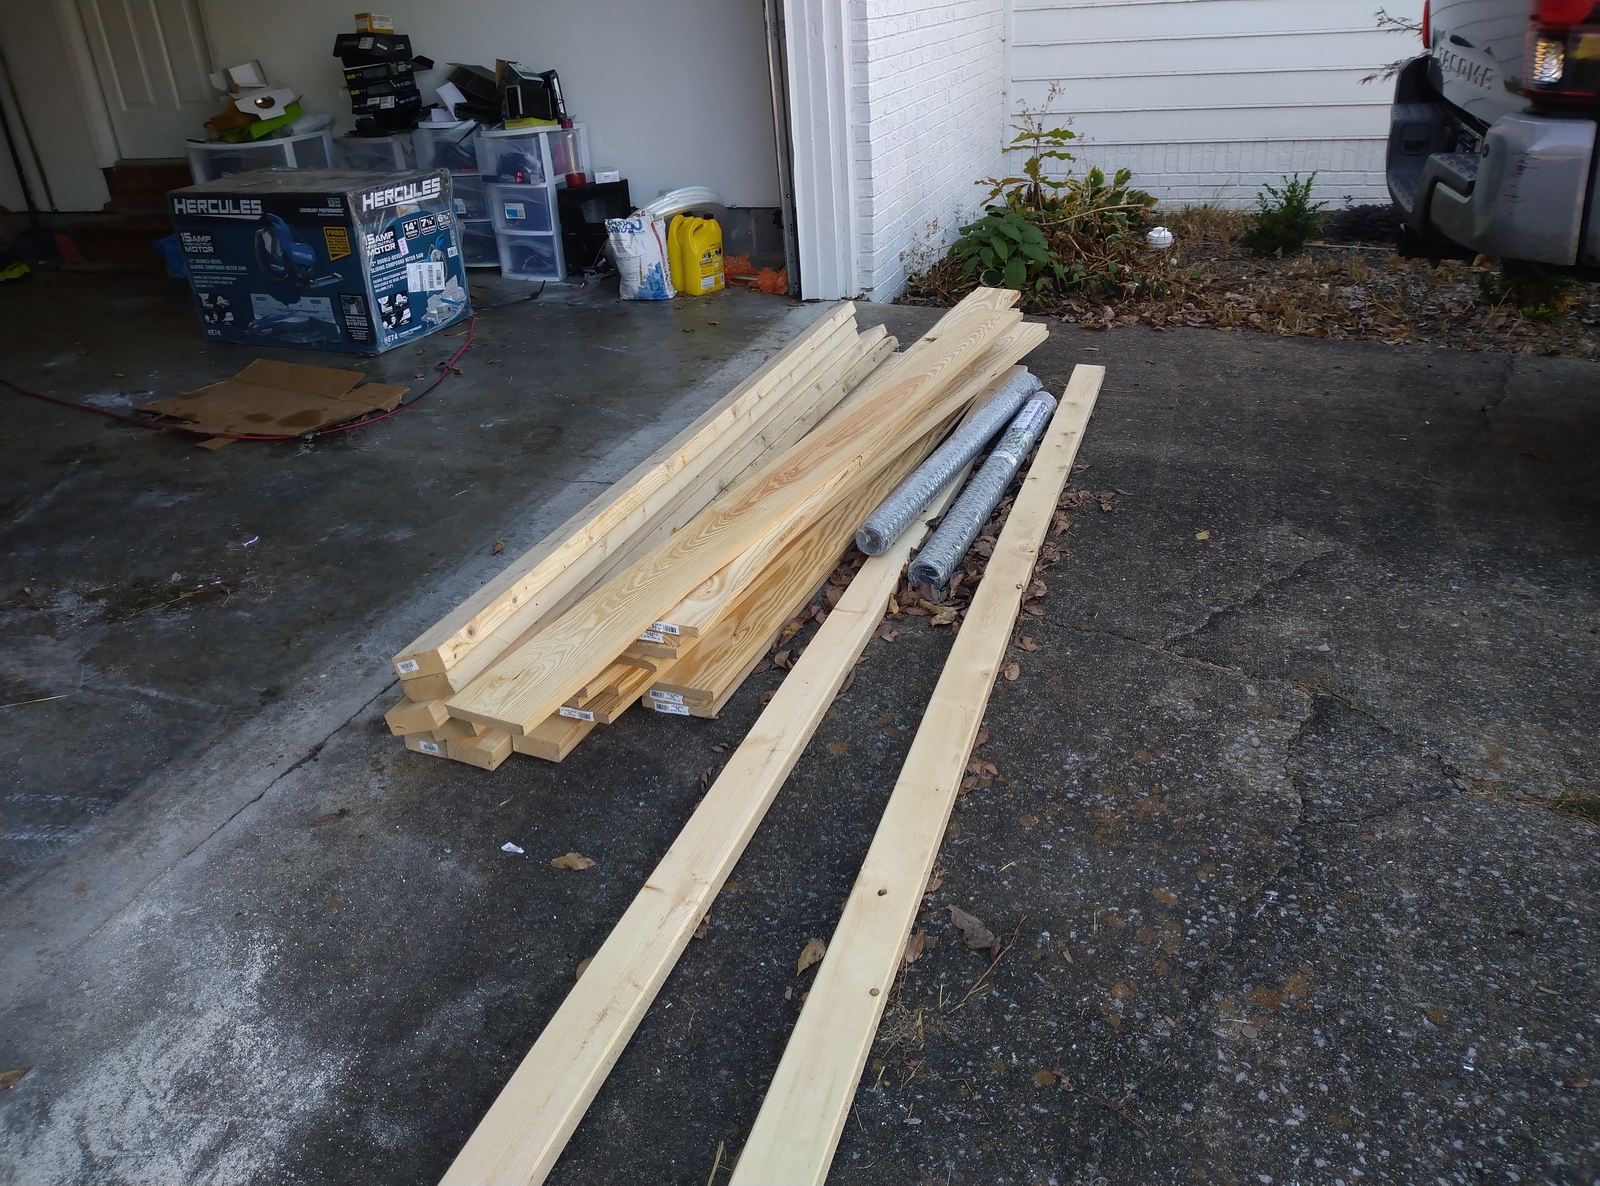 Lumber and building material between open garage and truck bed